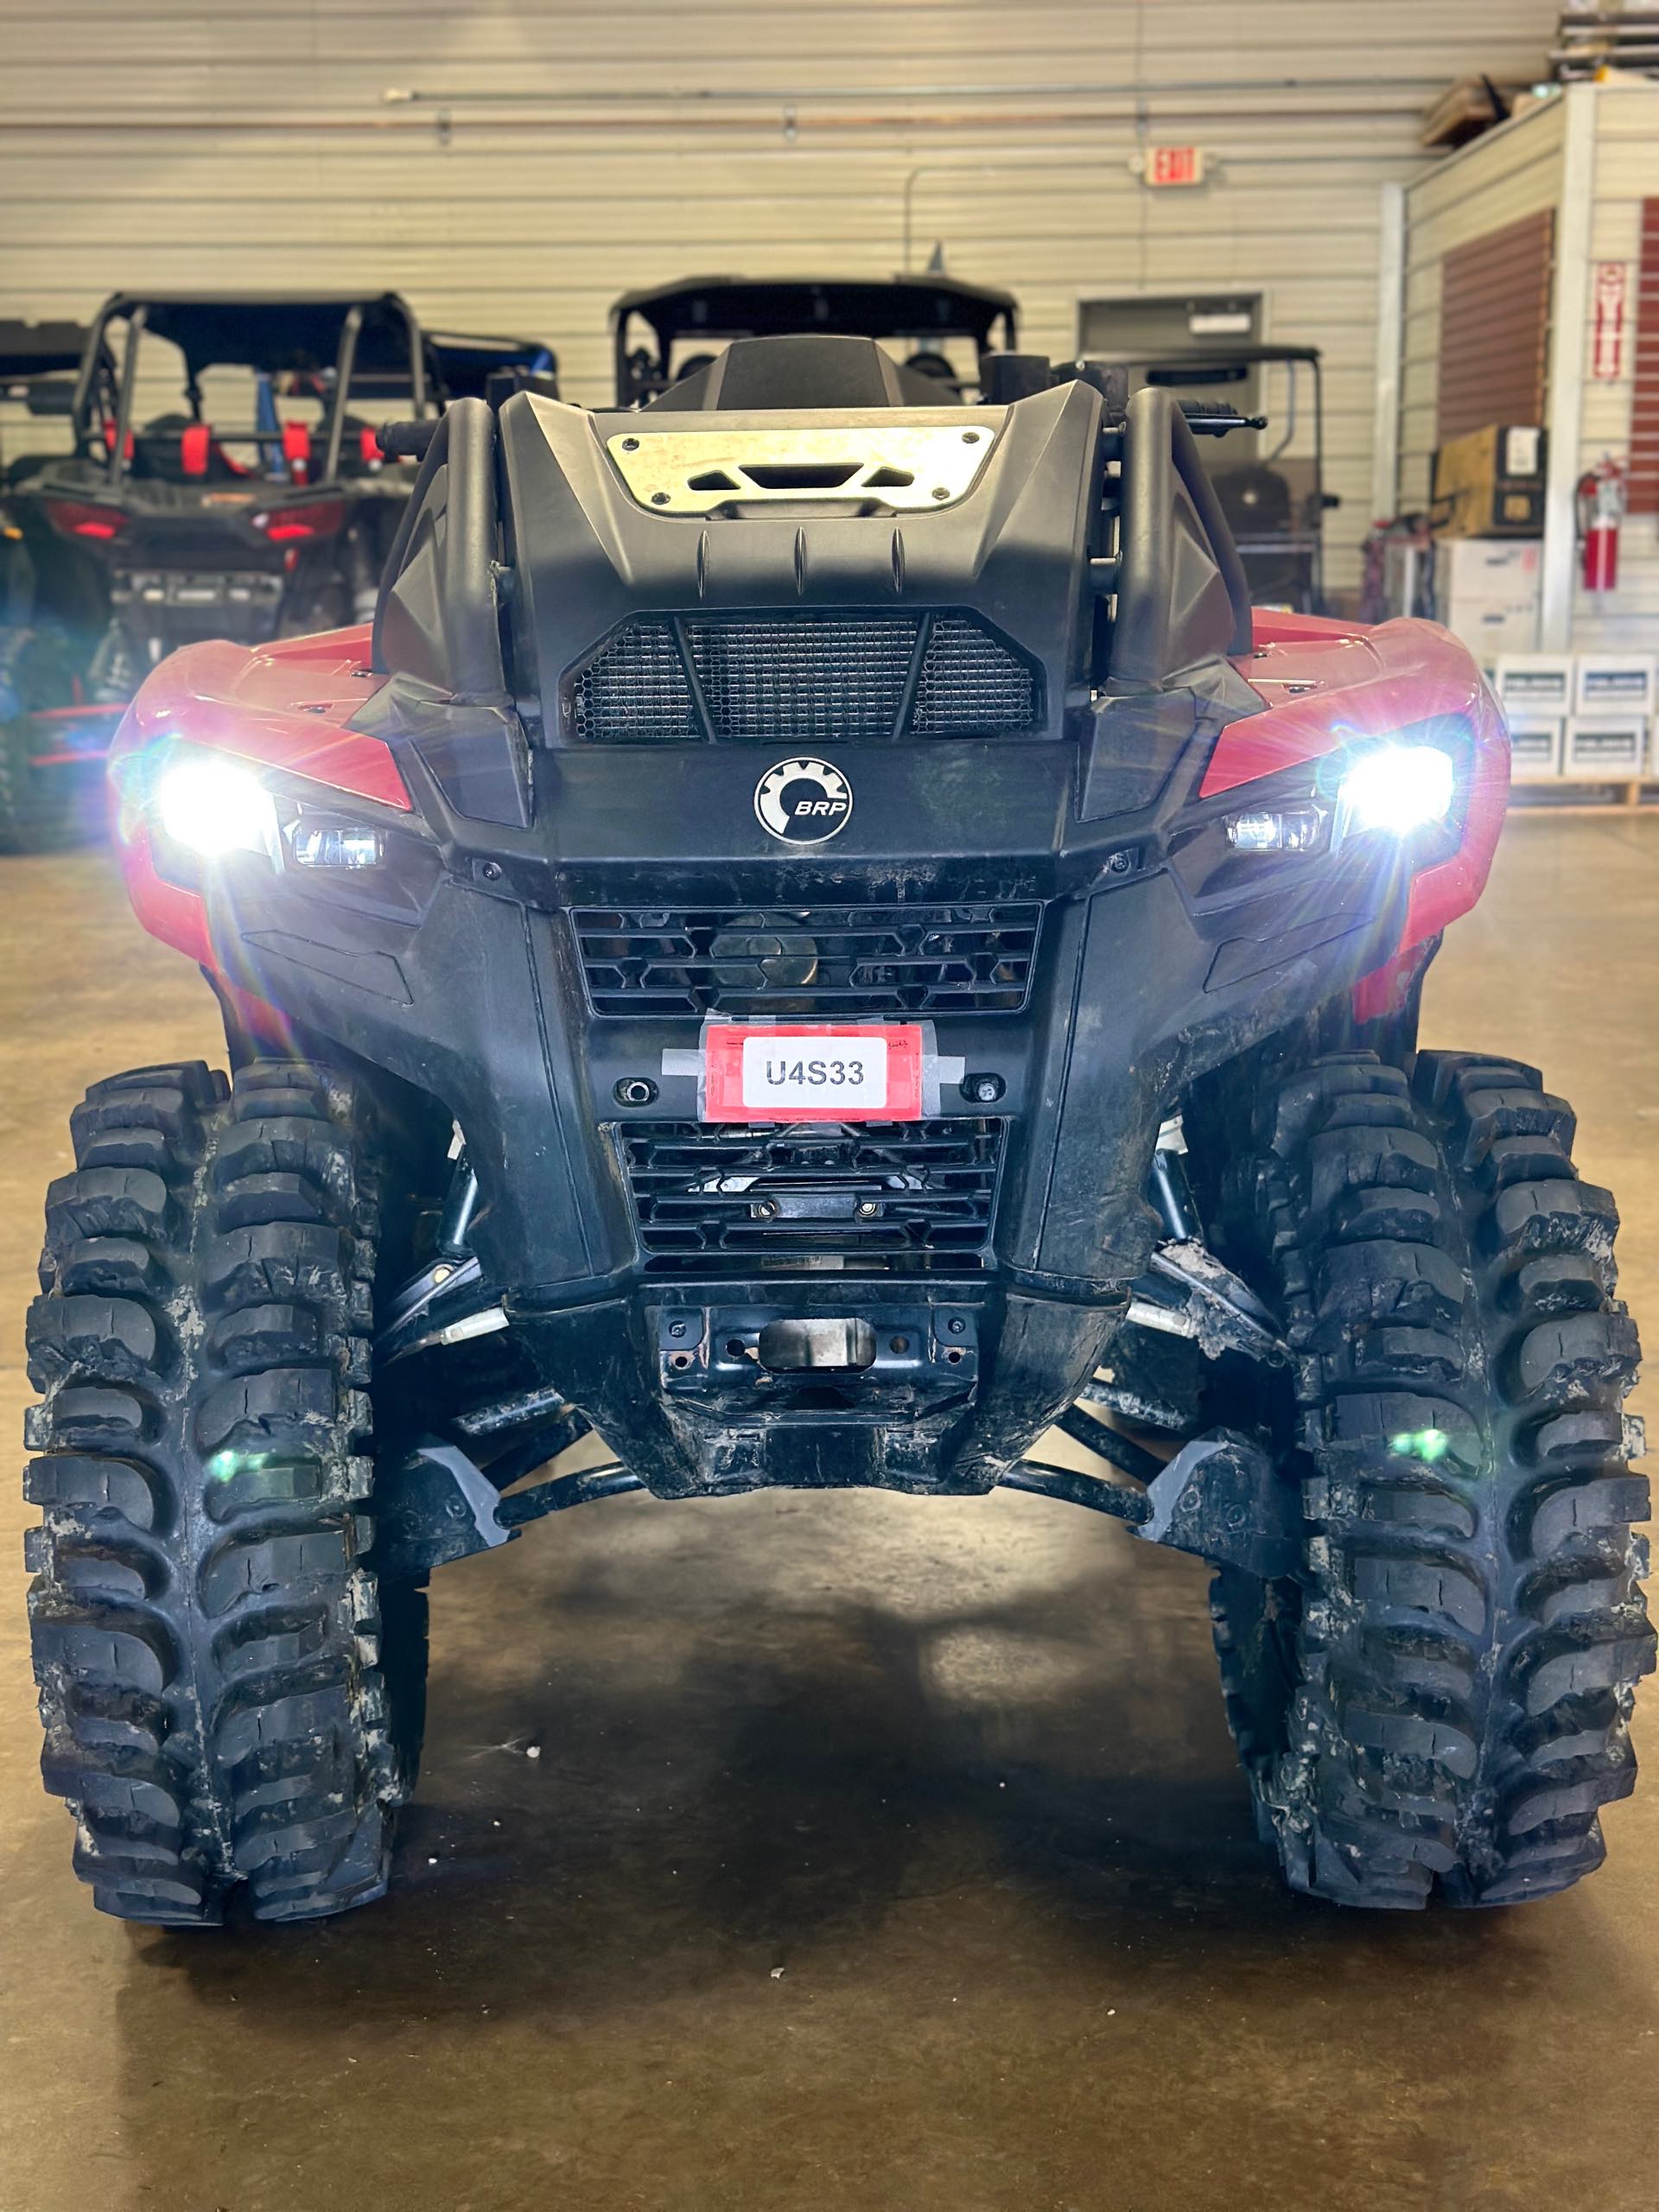 2023 Can-Am Outlander X mr 700 at Southern Illinois Motorsports